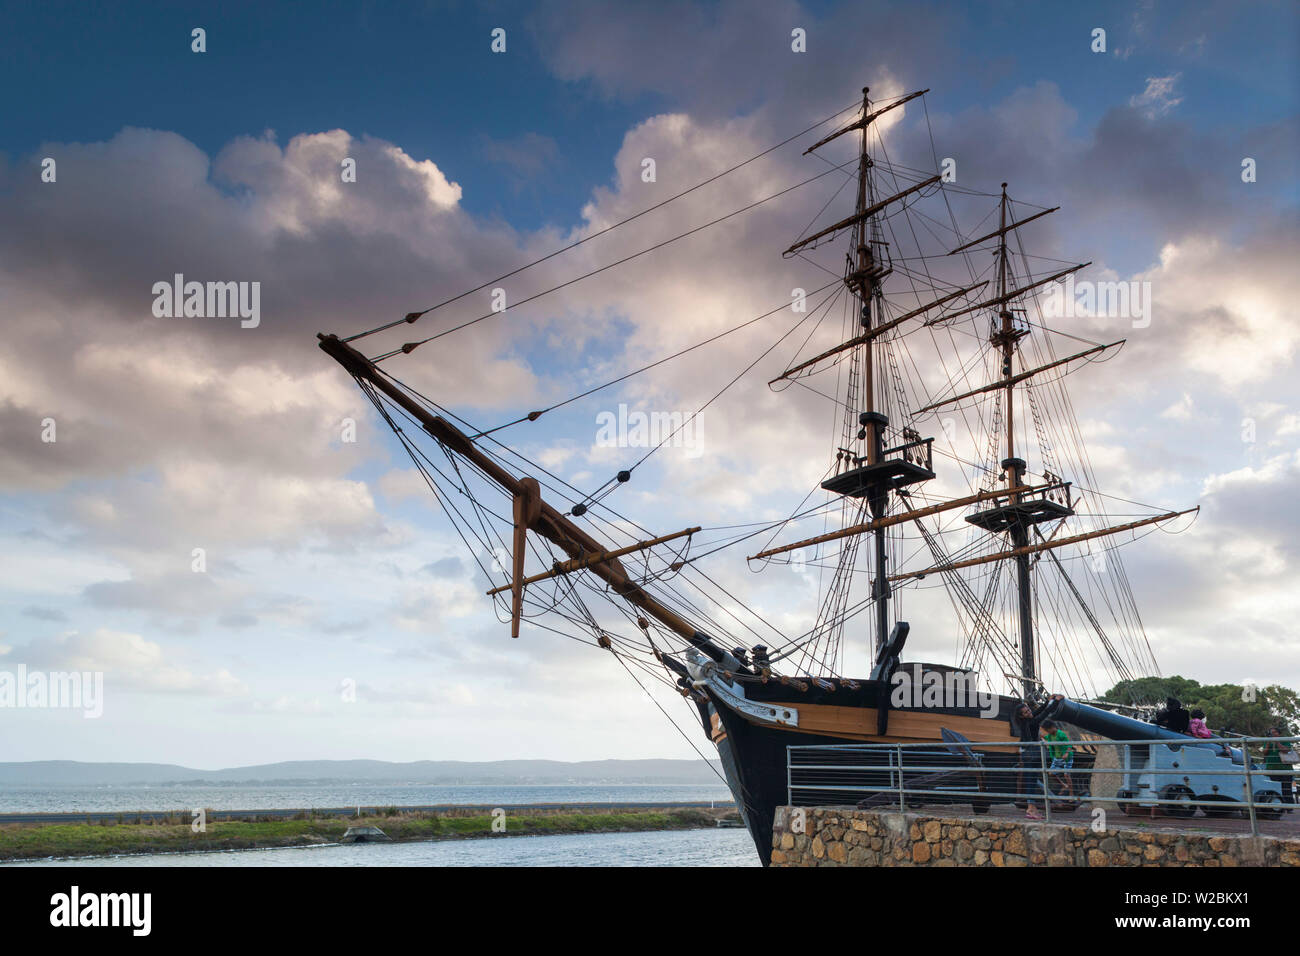 Australia, Western Australia, The Southwest, Albany, replica of the Brig Amity ship, late afternoon Stock Photo